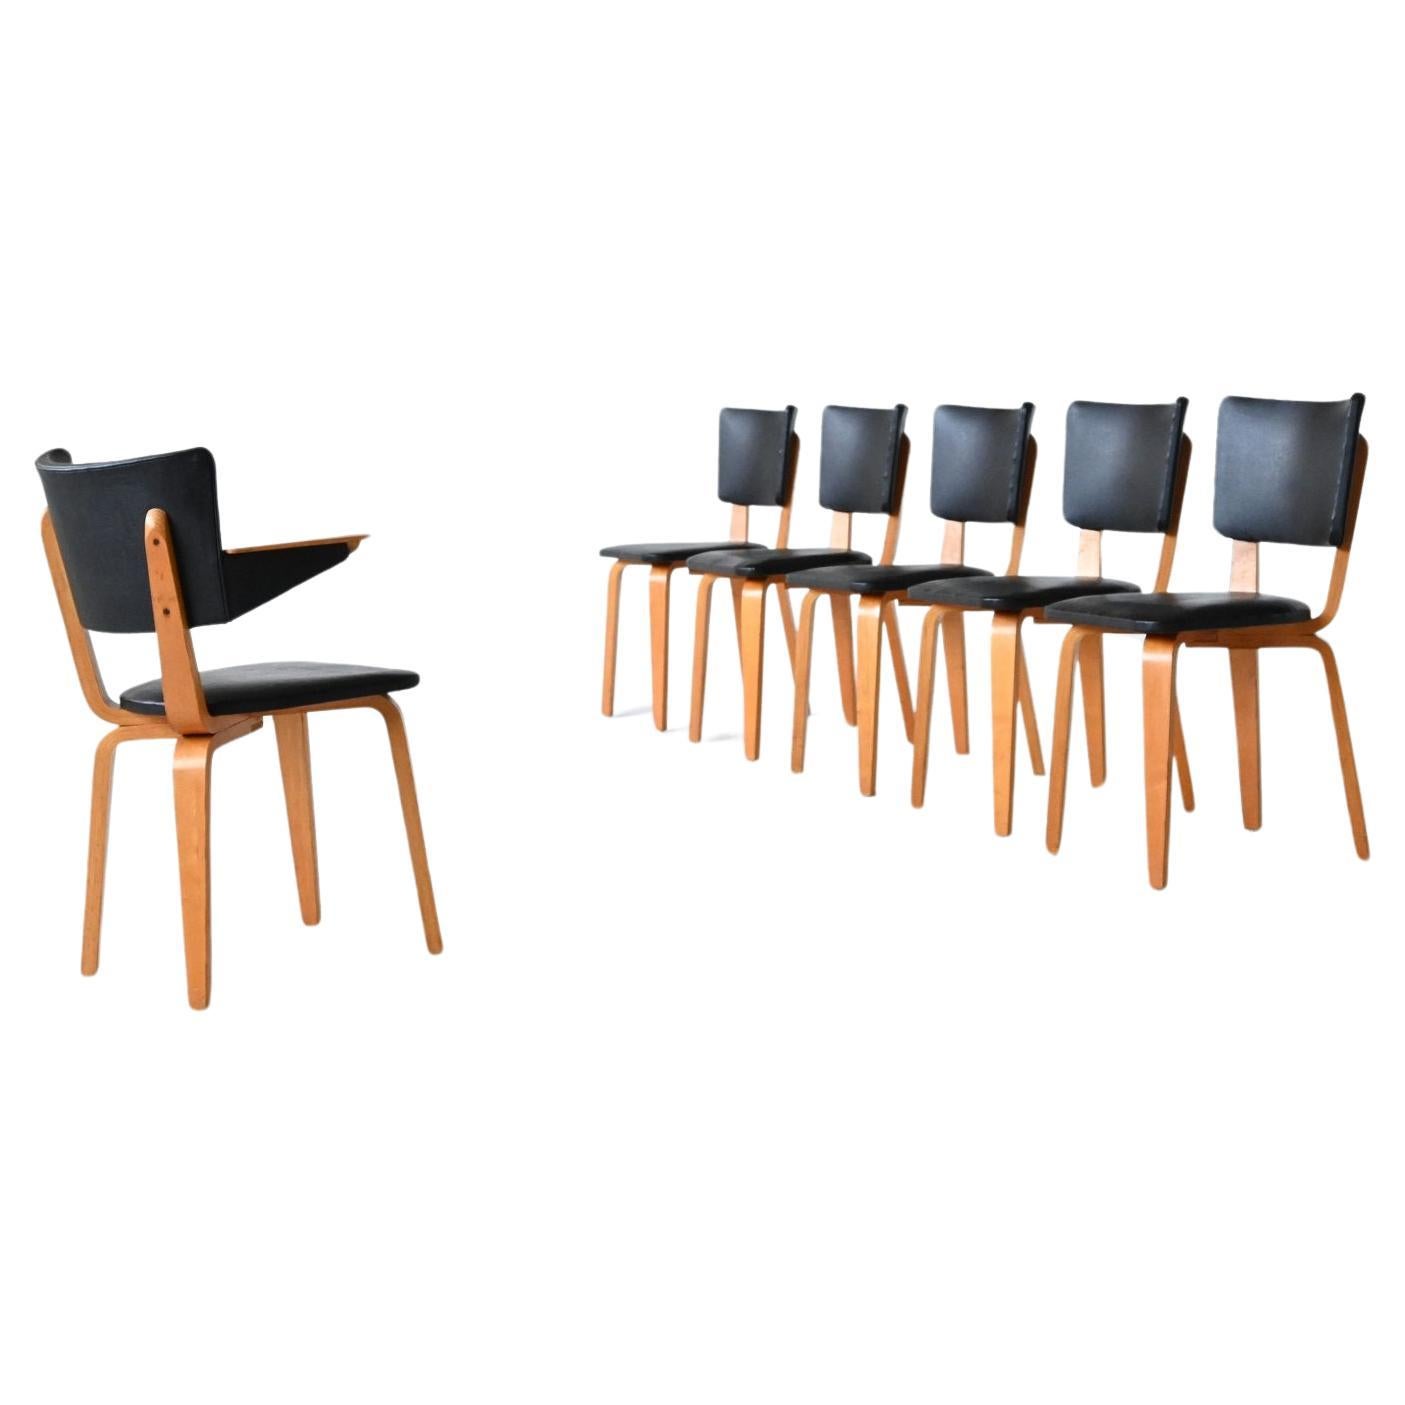 Cor Alons plywood dining chairs Gouda den Boer The Netherlands 1949